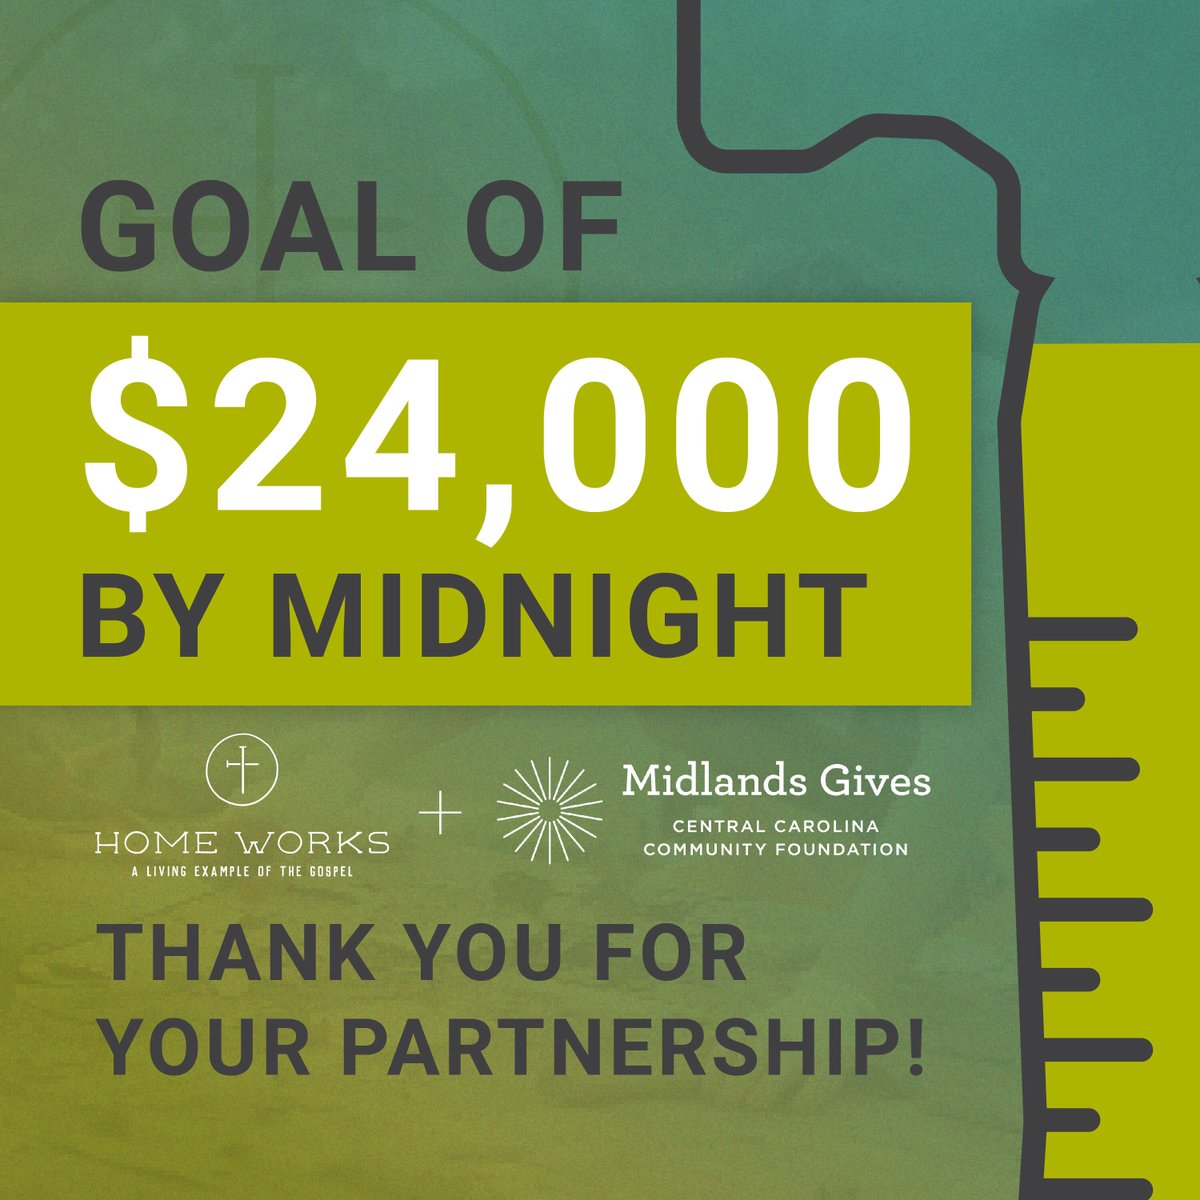 Happening RIGHT NOW! We have $5,000 more to go before we reach our new goal of $24,000 today during Midlands Gives! Can you help us reach it before midnight tonight?! Donate to our mission now using the link below. #midlandsgives #investforimpact midlandsgives.org/homeworksofame…